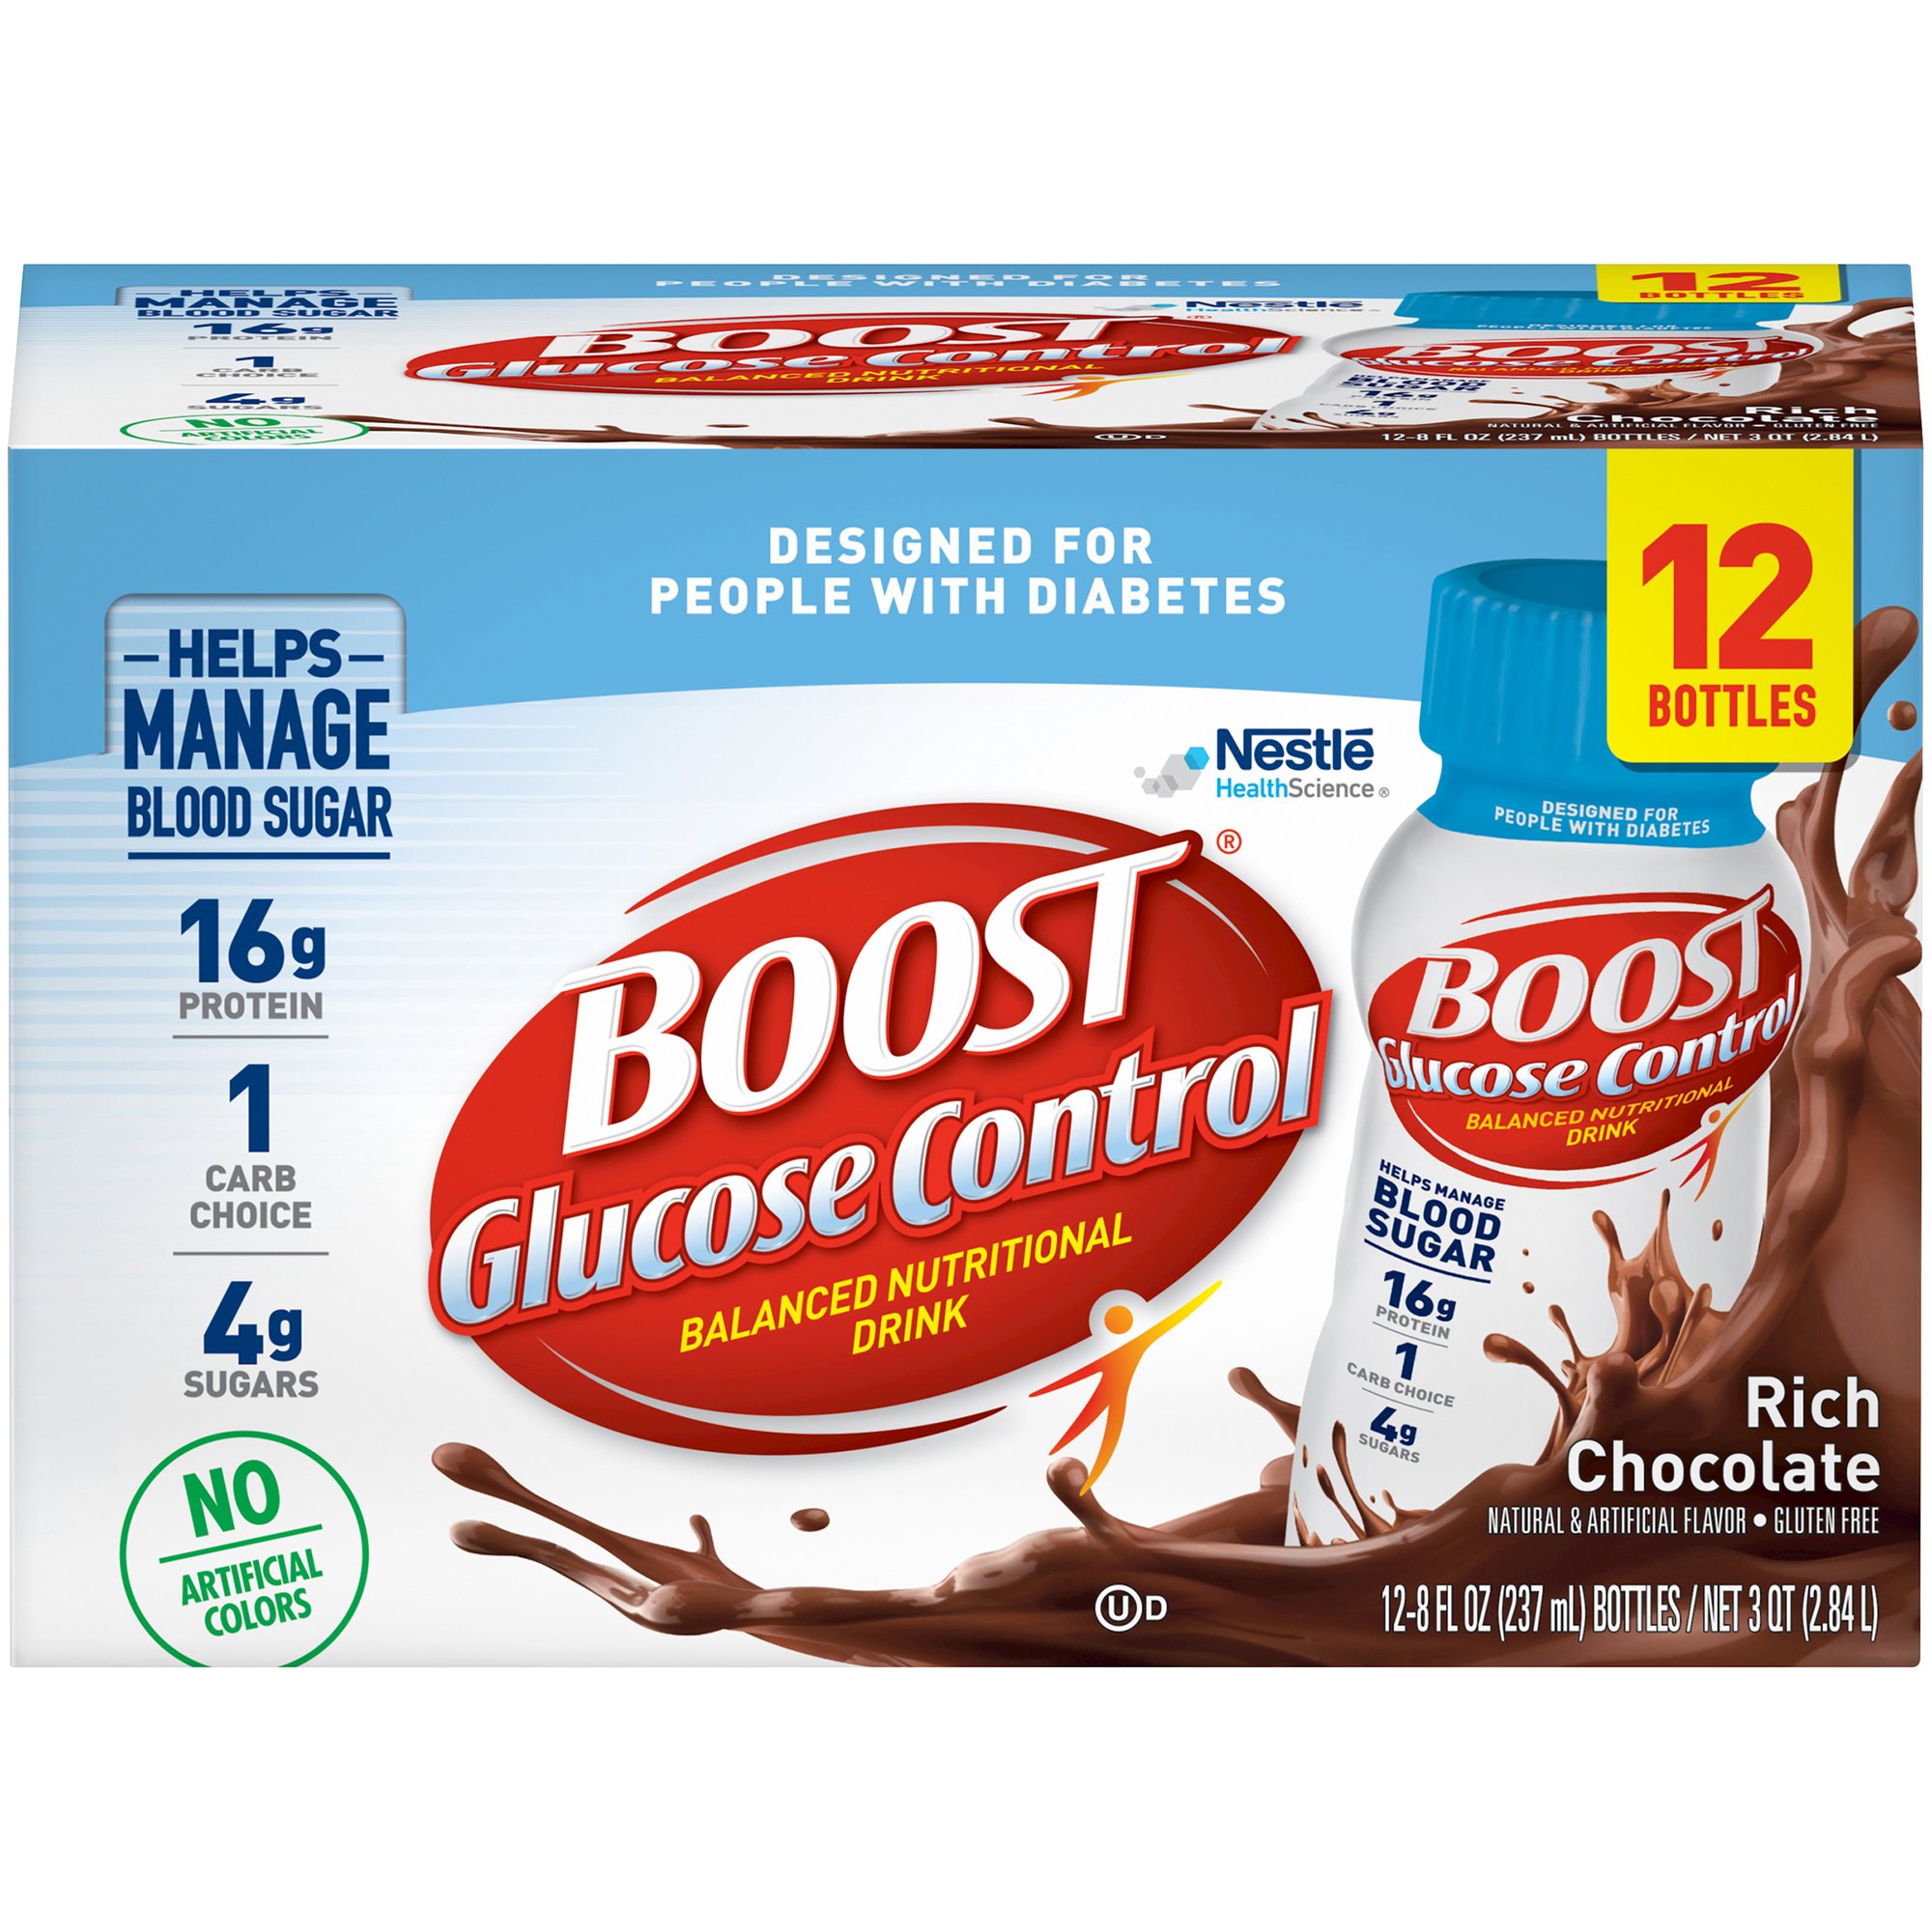 Boost Glucose Control Chocolate Oral Supplement, 8 oz. Bottle, 12 Pack